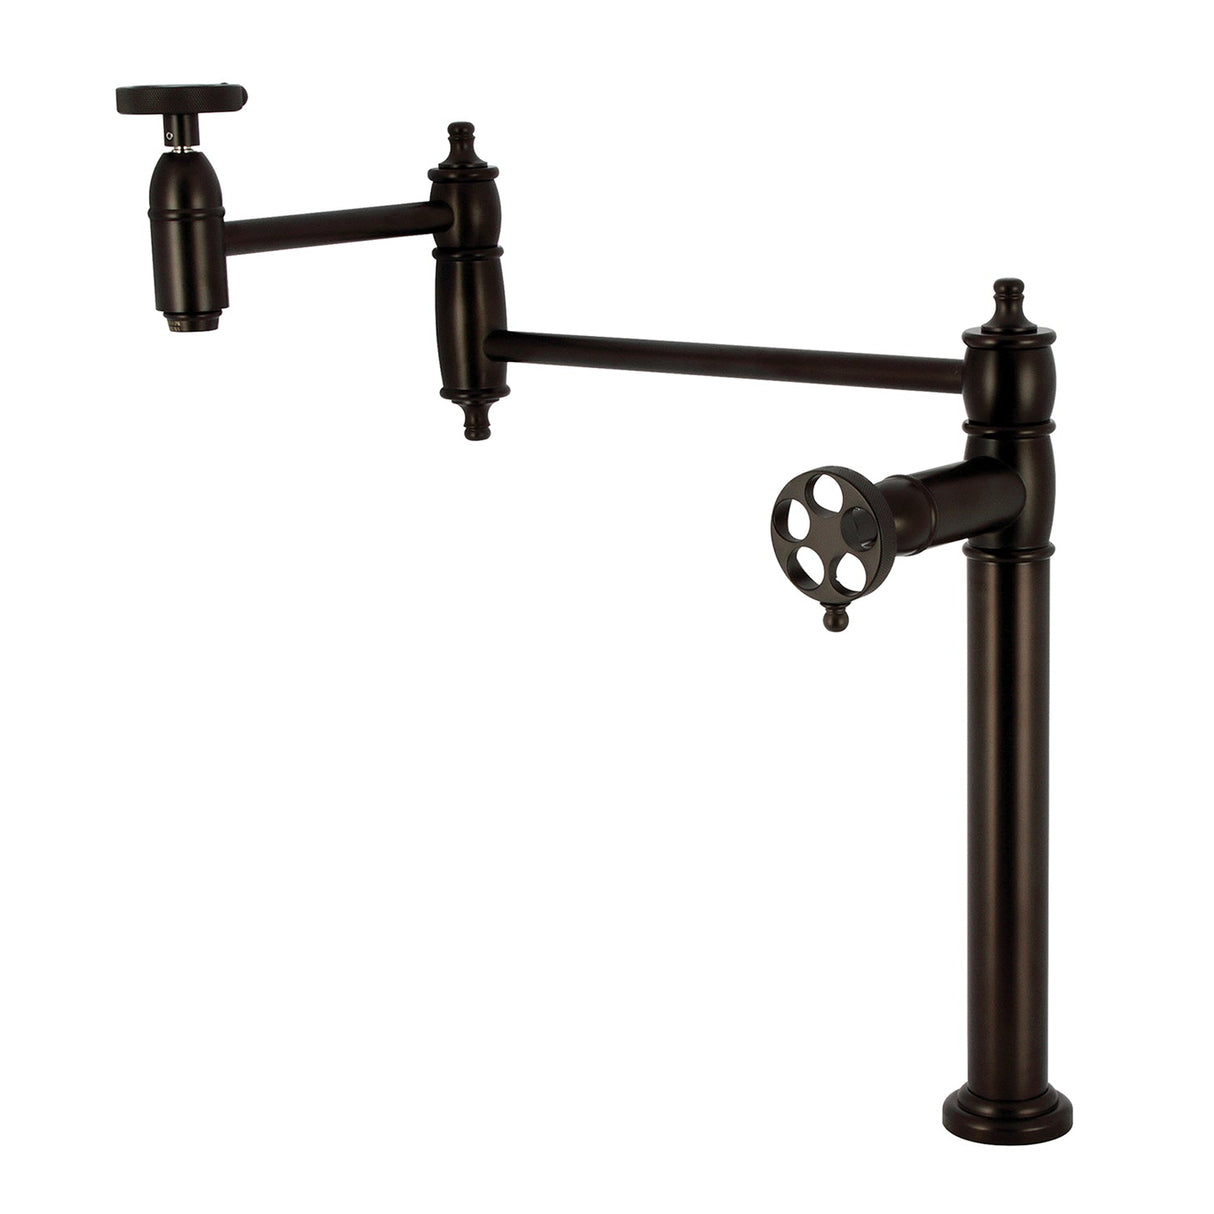 Wendell KS3705RKZ Two-Handle 1-Hole Deck Mount Pot Filler Faucet with Knurled Handle, Oil Rubbed Bronze